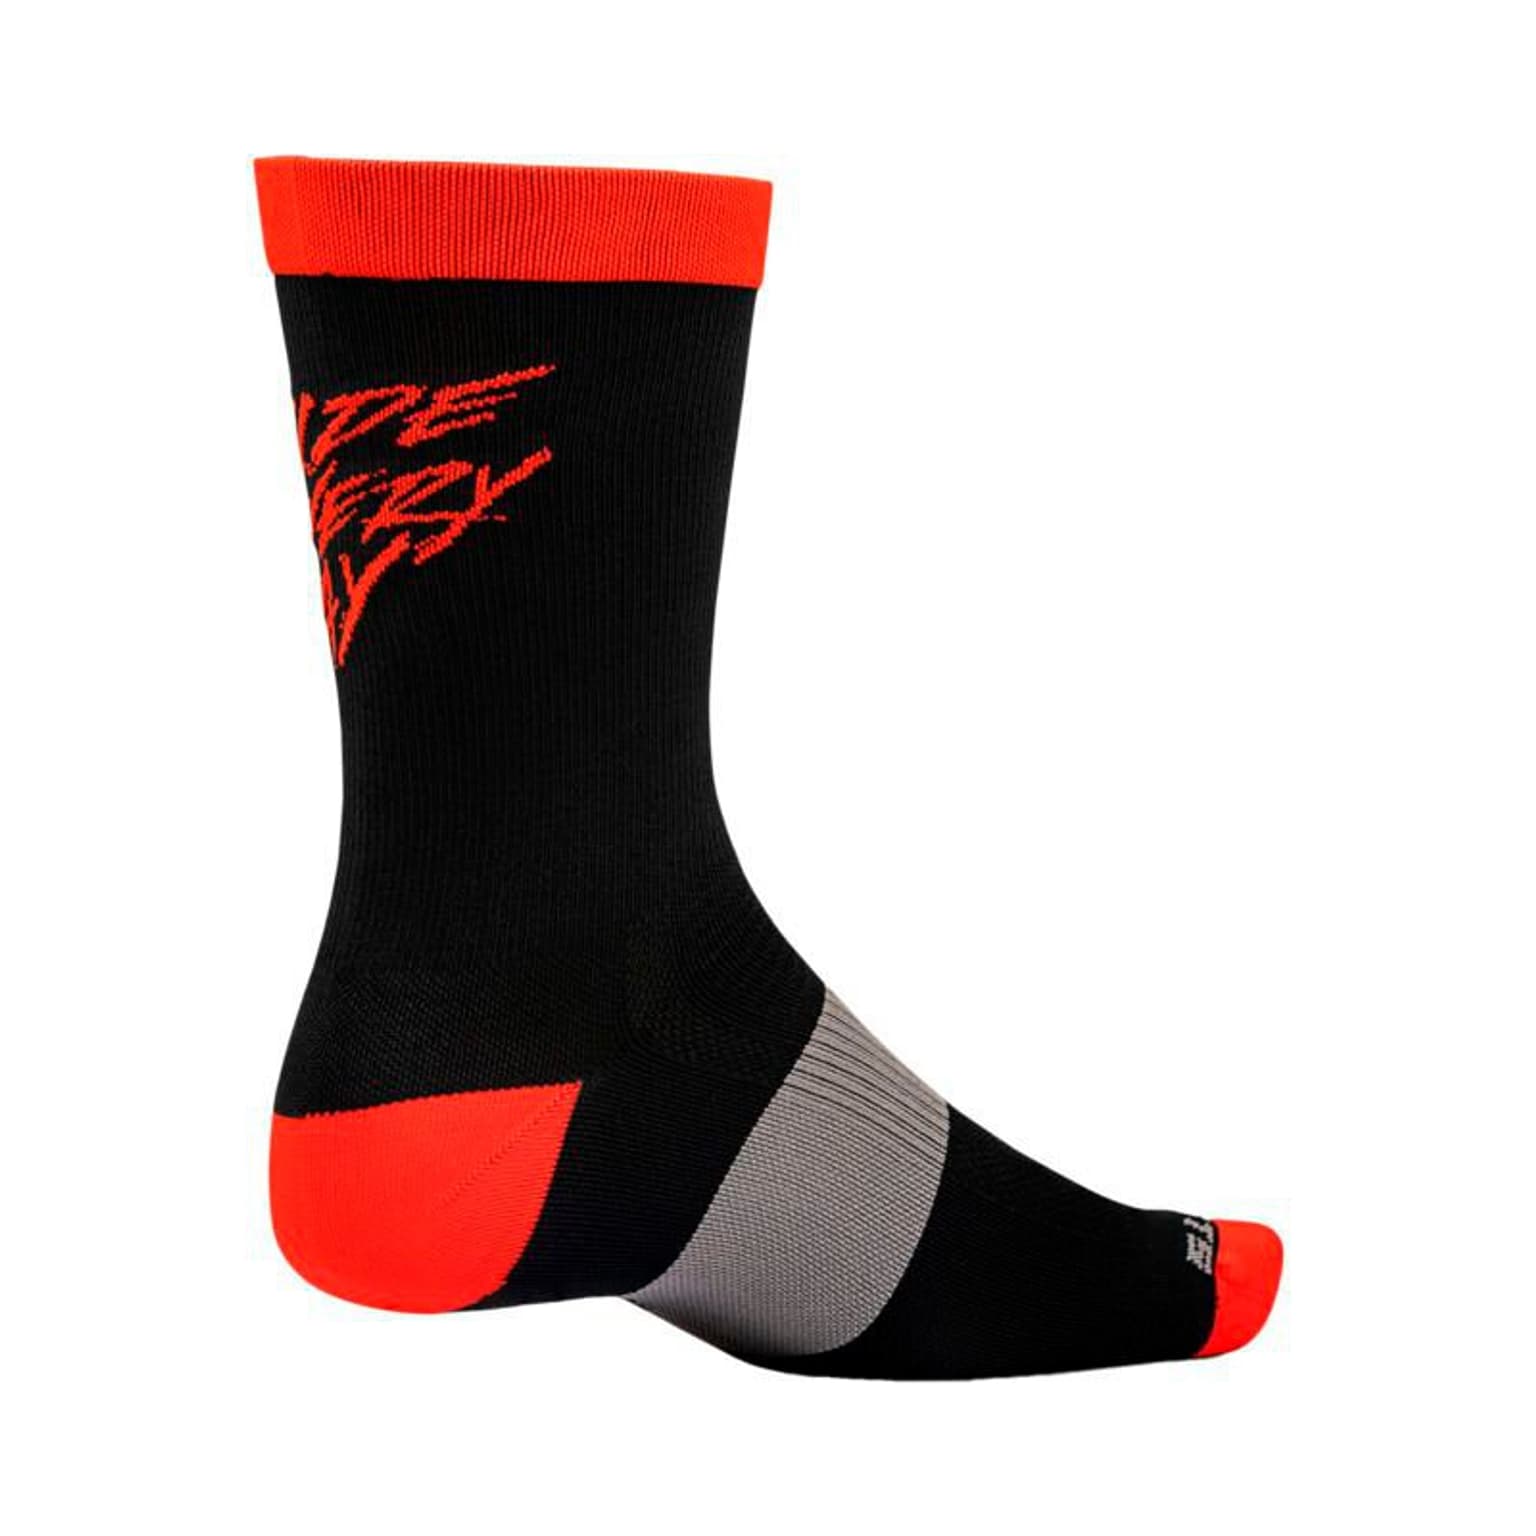 Ride Concepts Ride Concepts Ride Every Day Synthetic Velosocken rosso 1